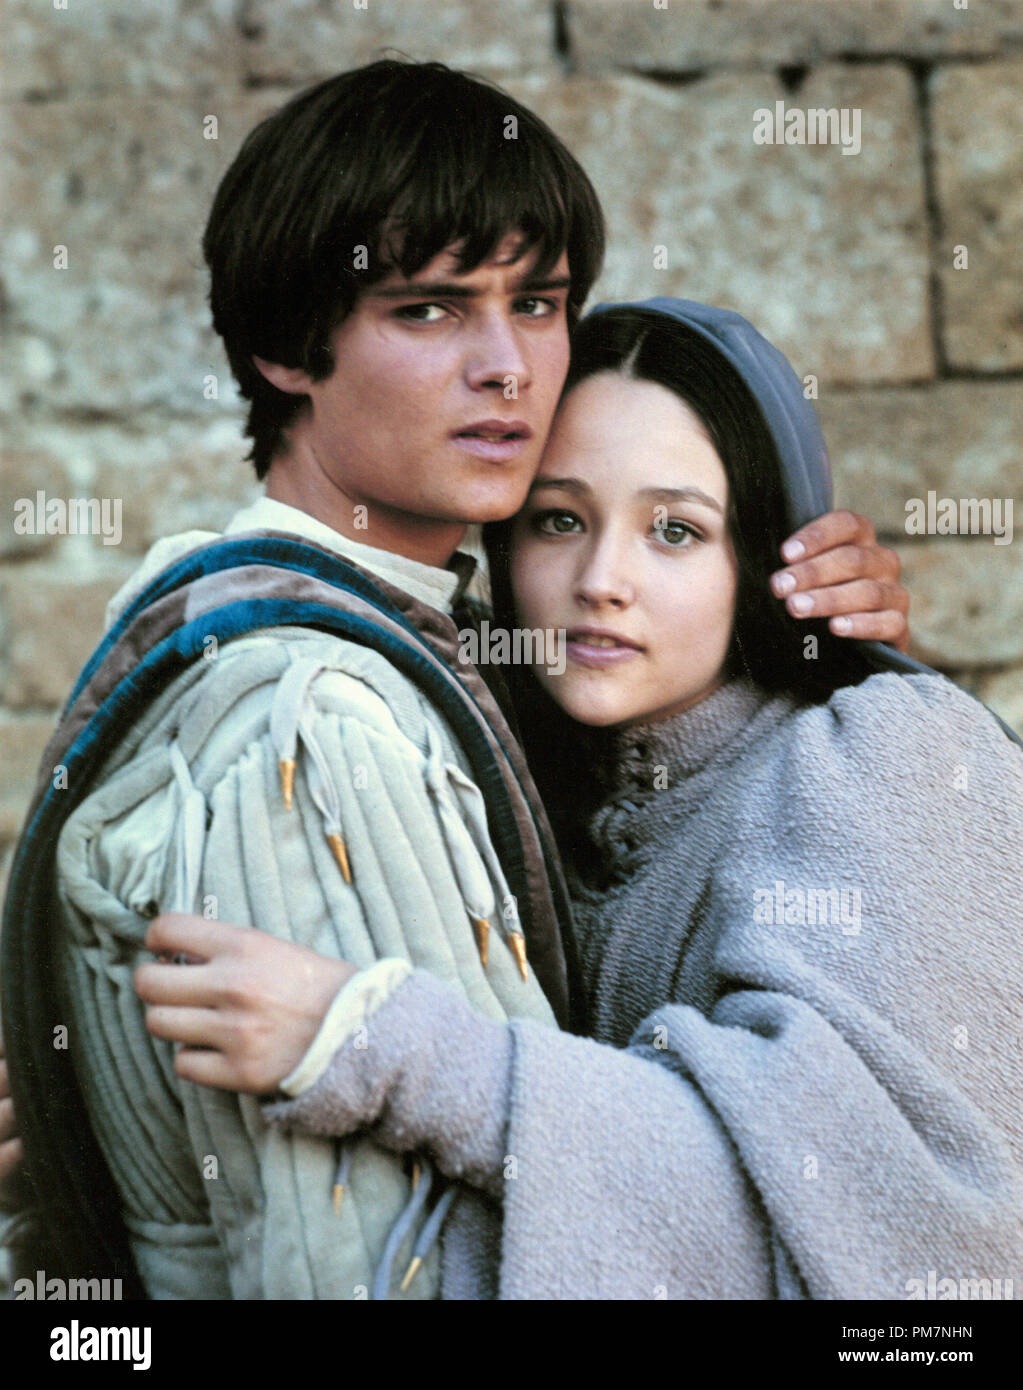 Leonard Whiting and Olivia Hussey in "Romeo & Juliet" 1968 Paramount File Reference # 31202_946THA Stock Photo